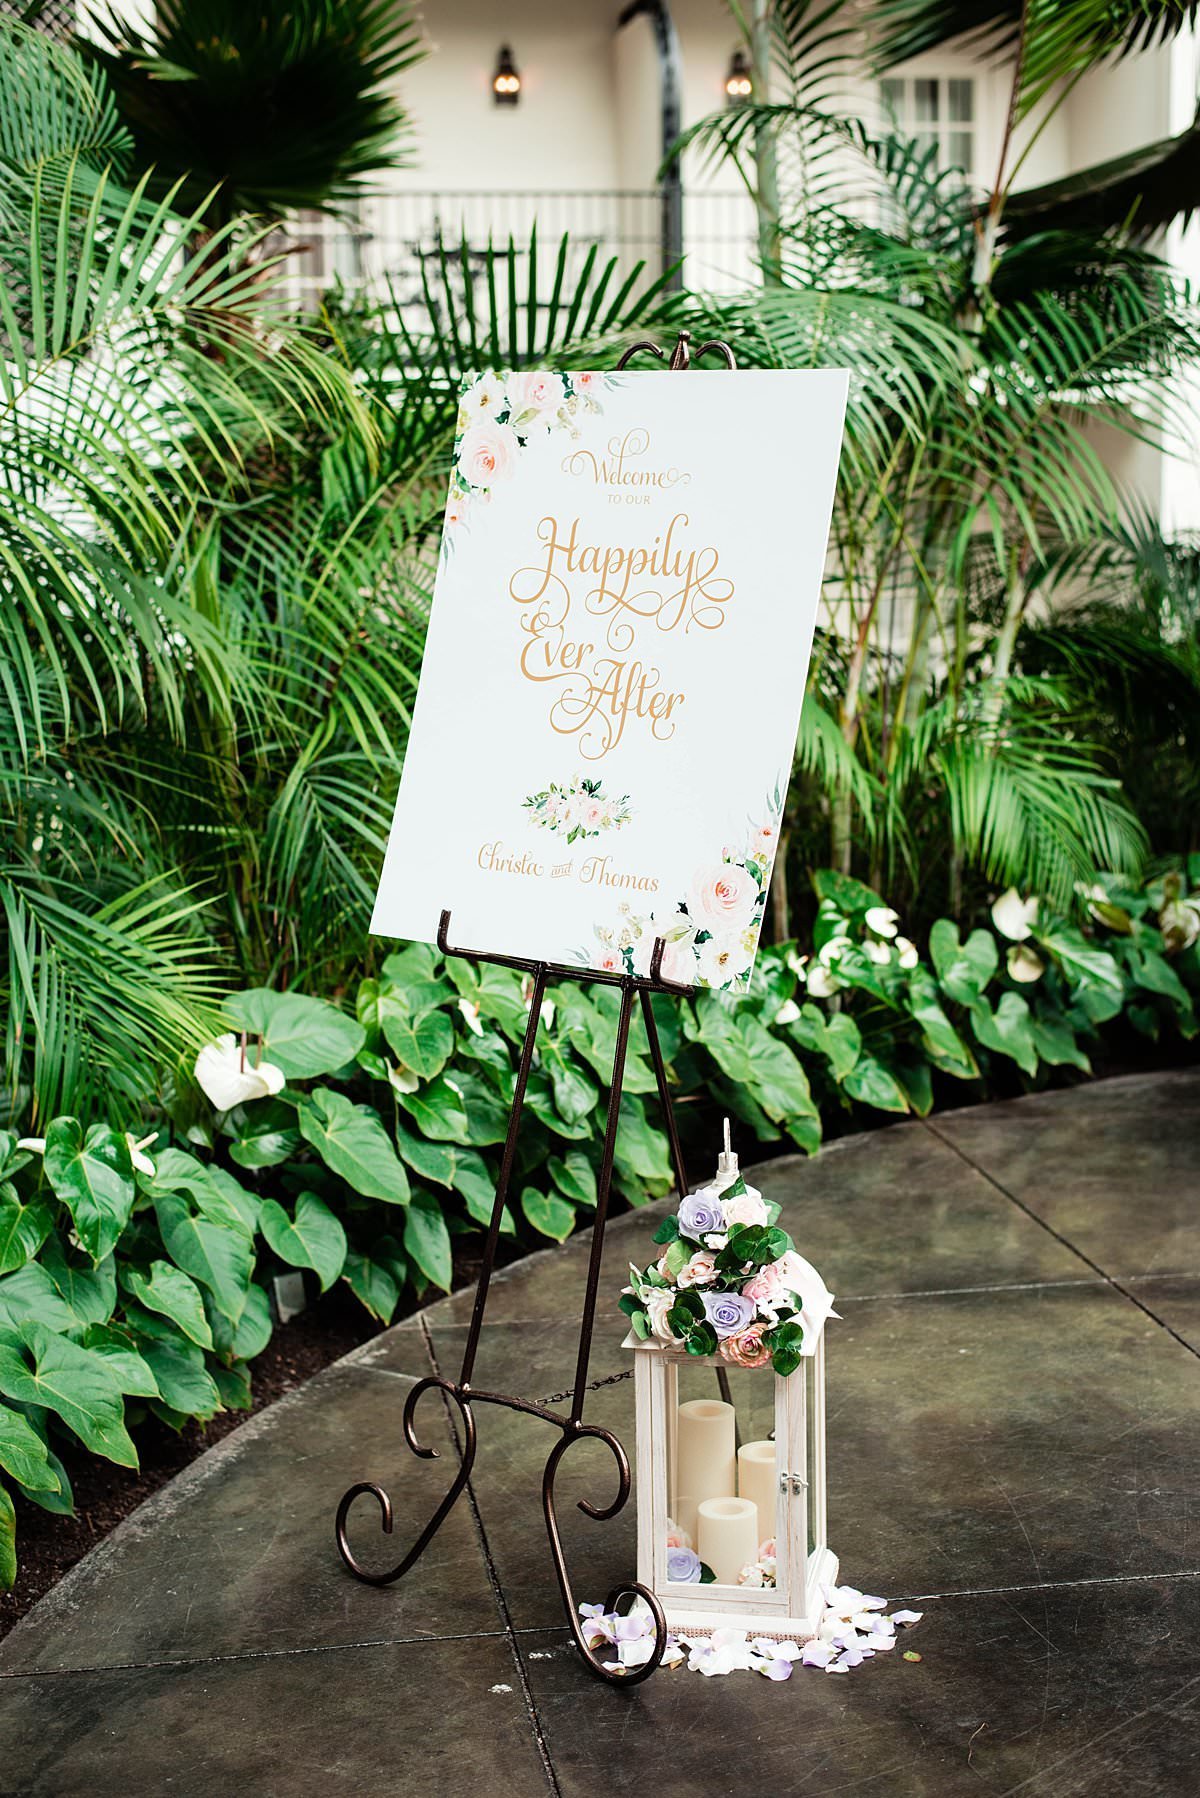 Happily Ever After welcome sign at the front of the ceremony site inside Gaylord Opryland